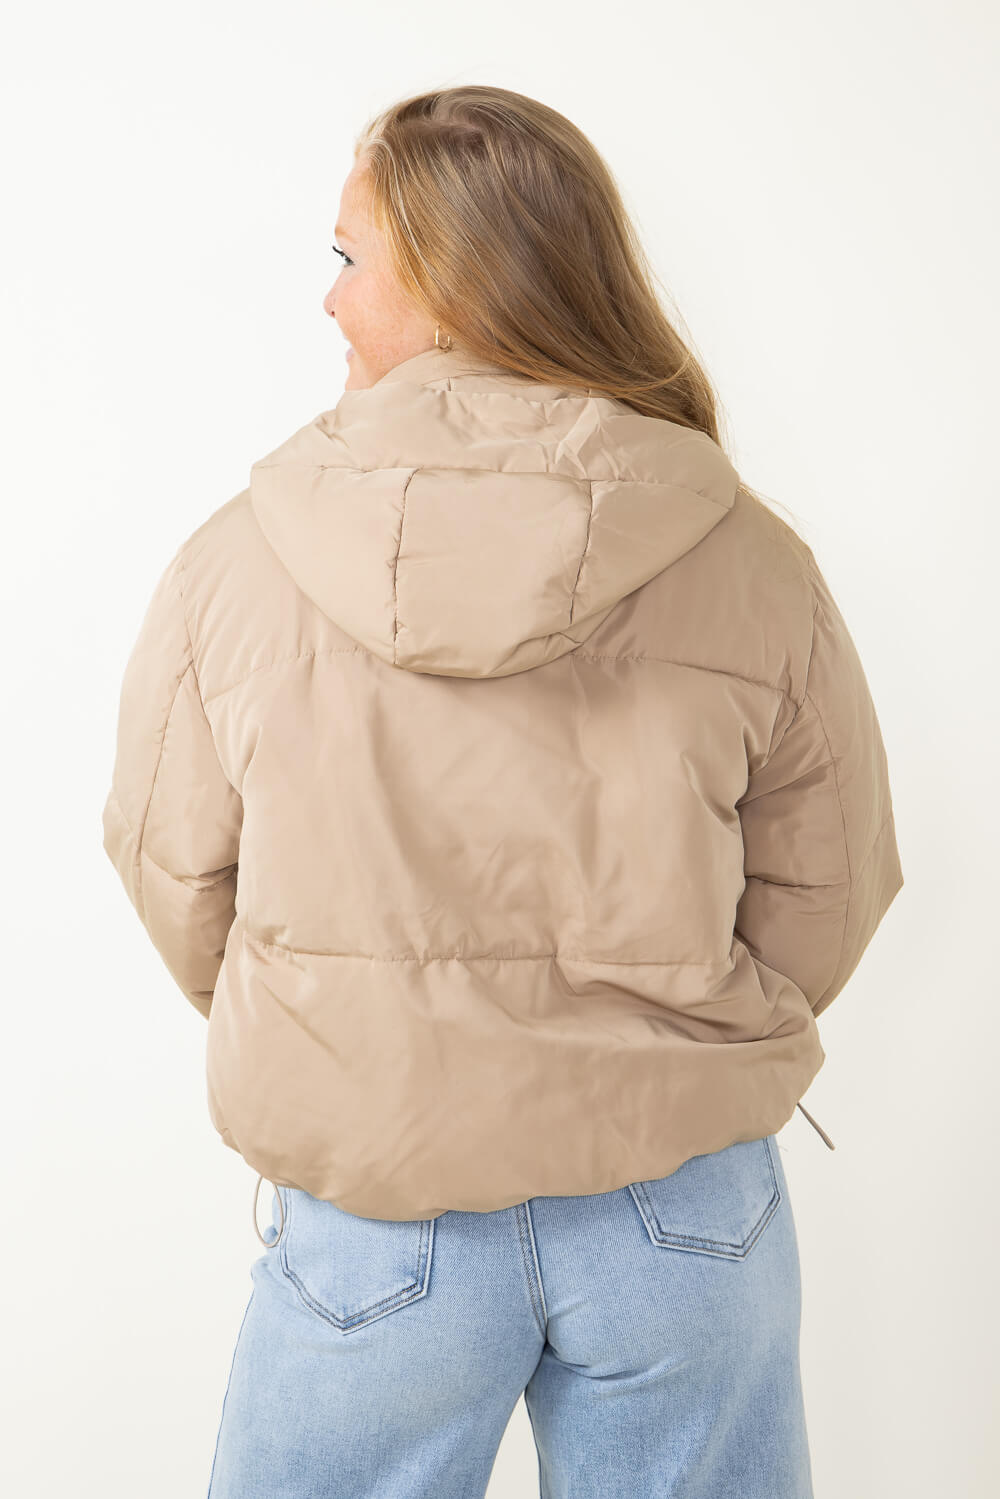 Save The Duck Lydia Jacket in Rainy Beige | Save the duck, Quilted puffer  jacket, Puffer coat